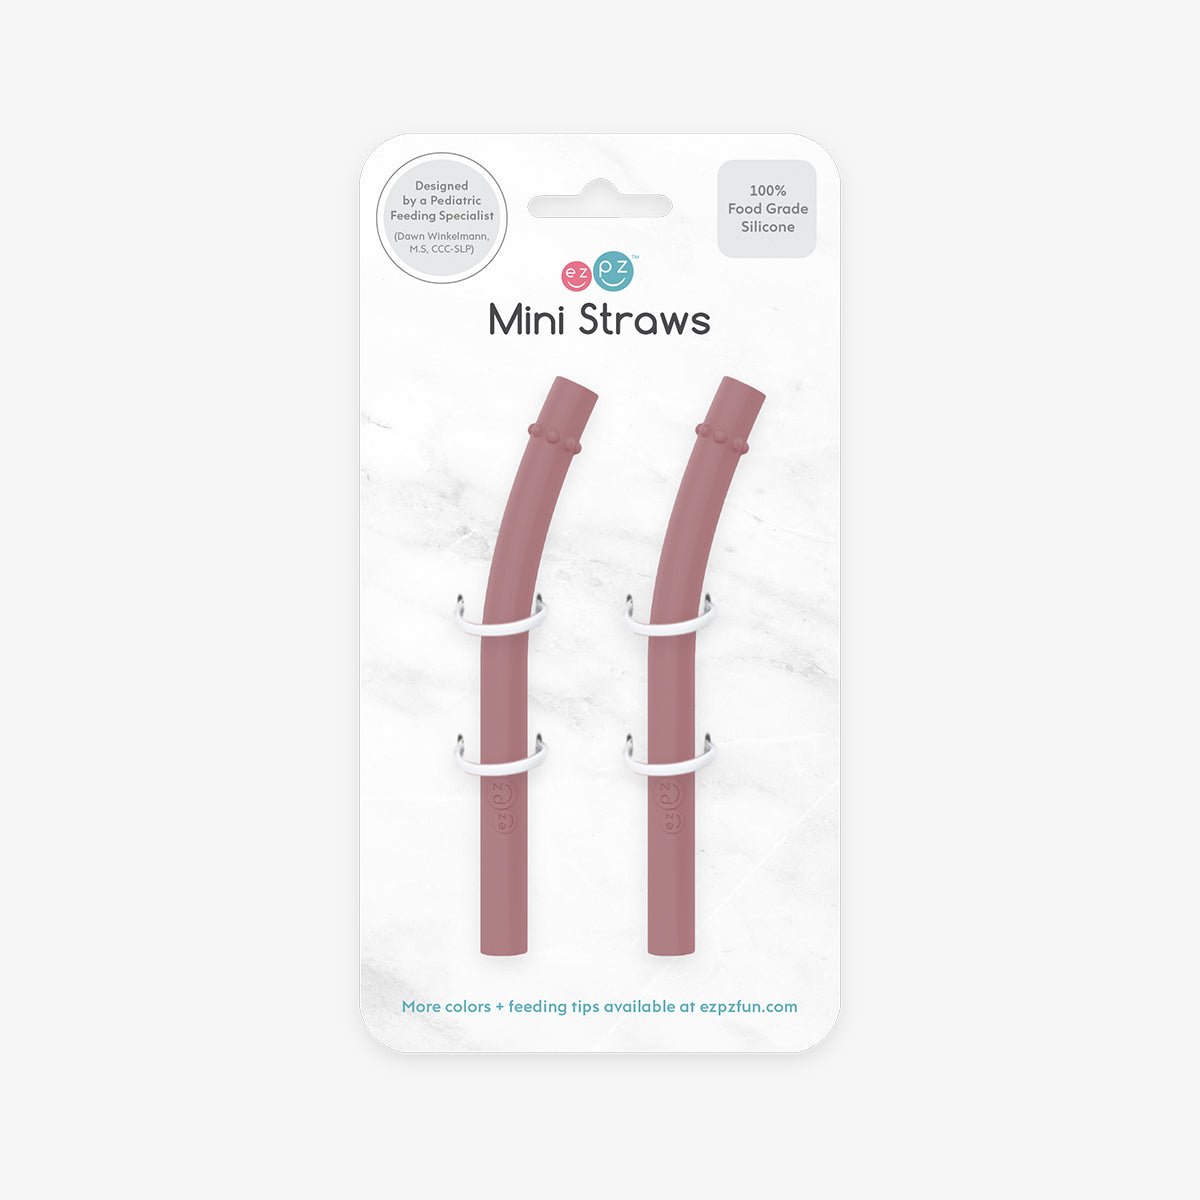 Mini Straws in Mauve / Silicone Straw Replacement Pack for the ezpz Mini Cup & Straw System